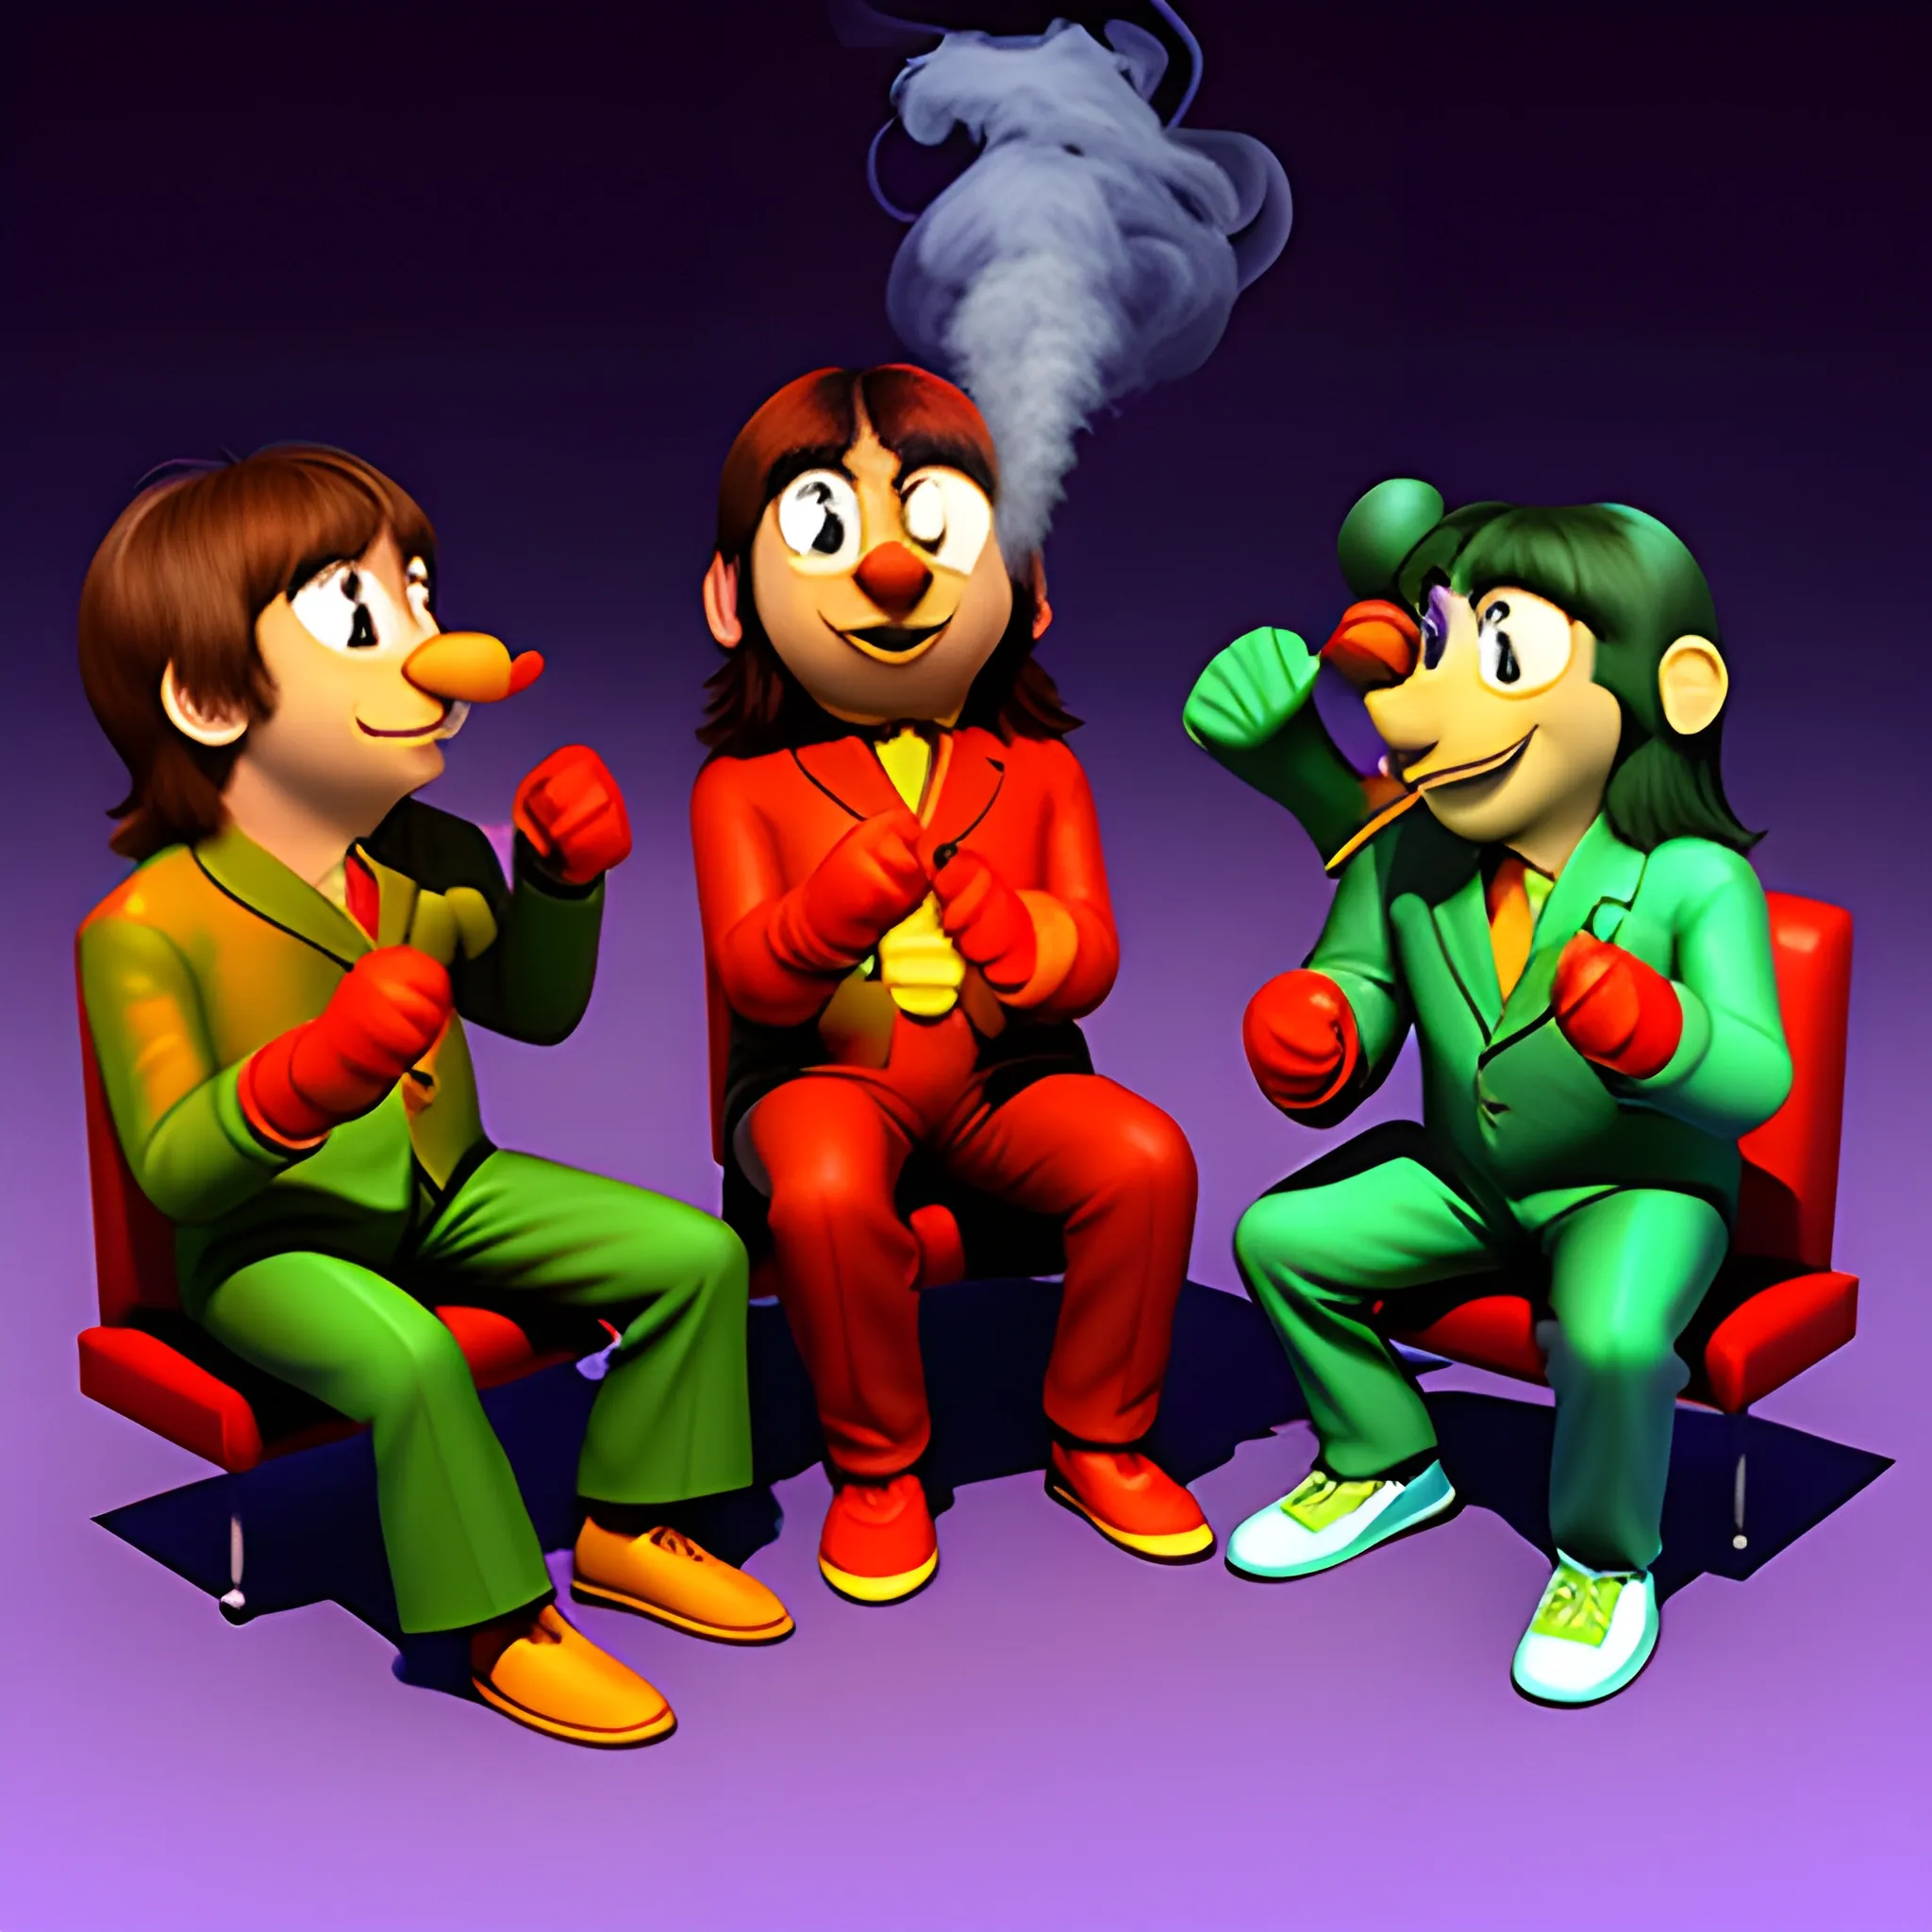 The Beatles & Knuckles smoking a joint, 3D